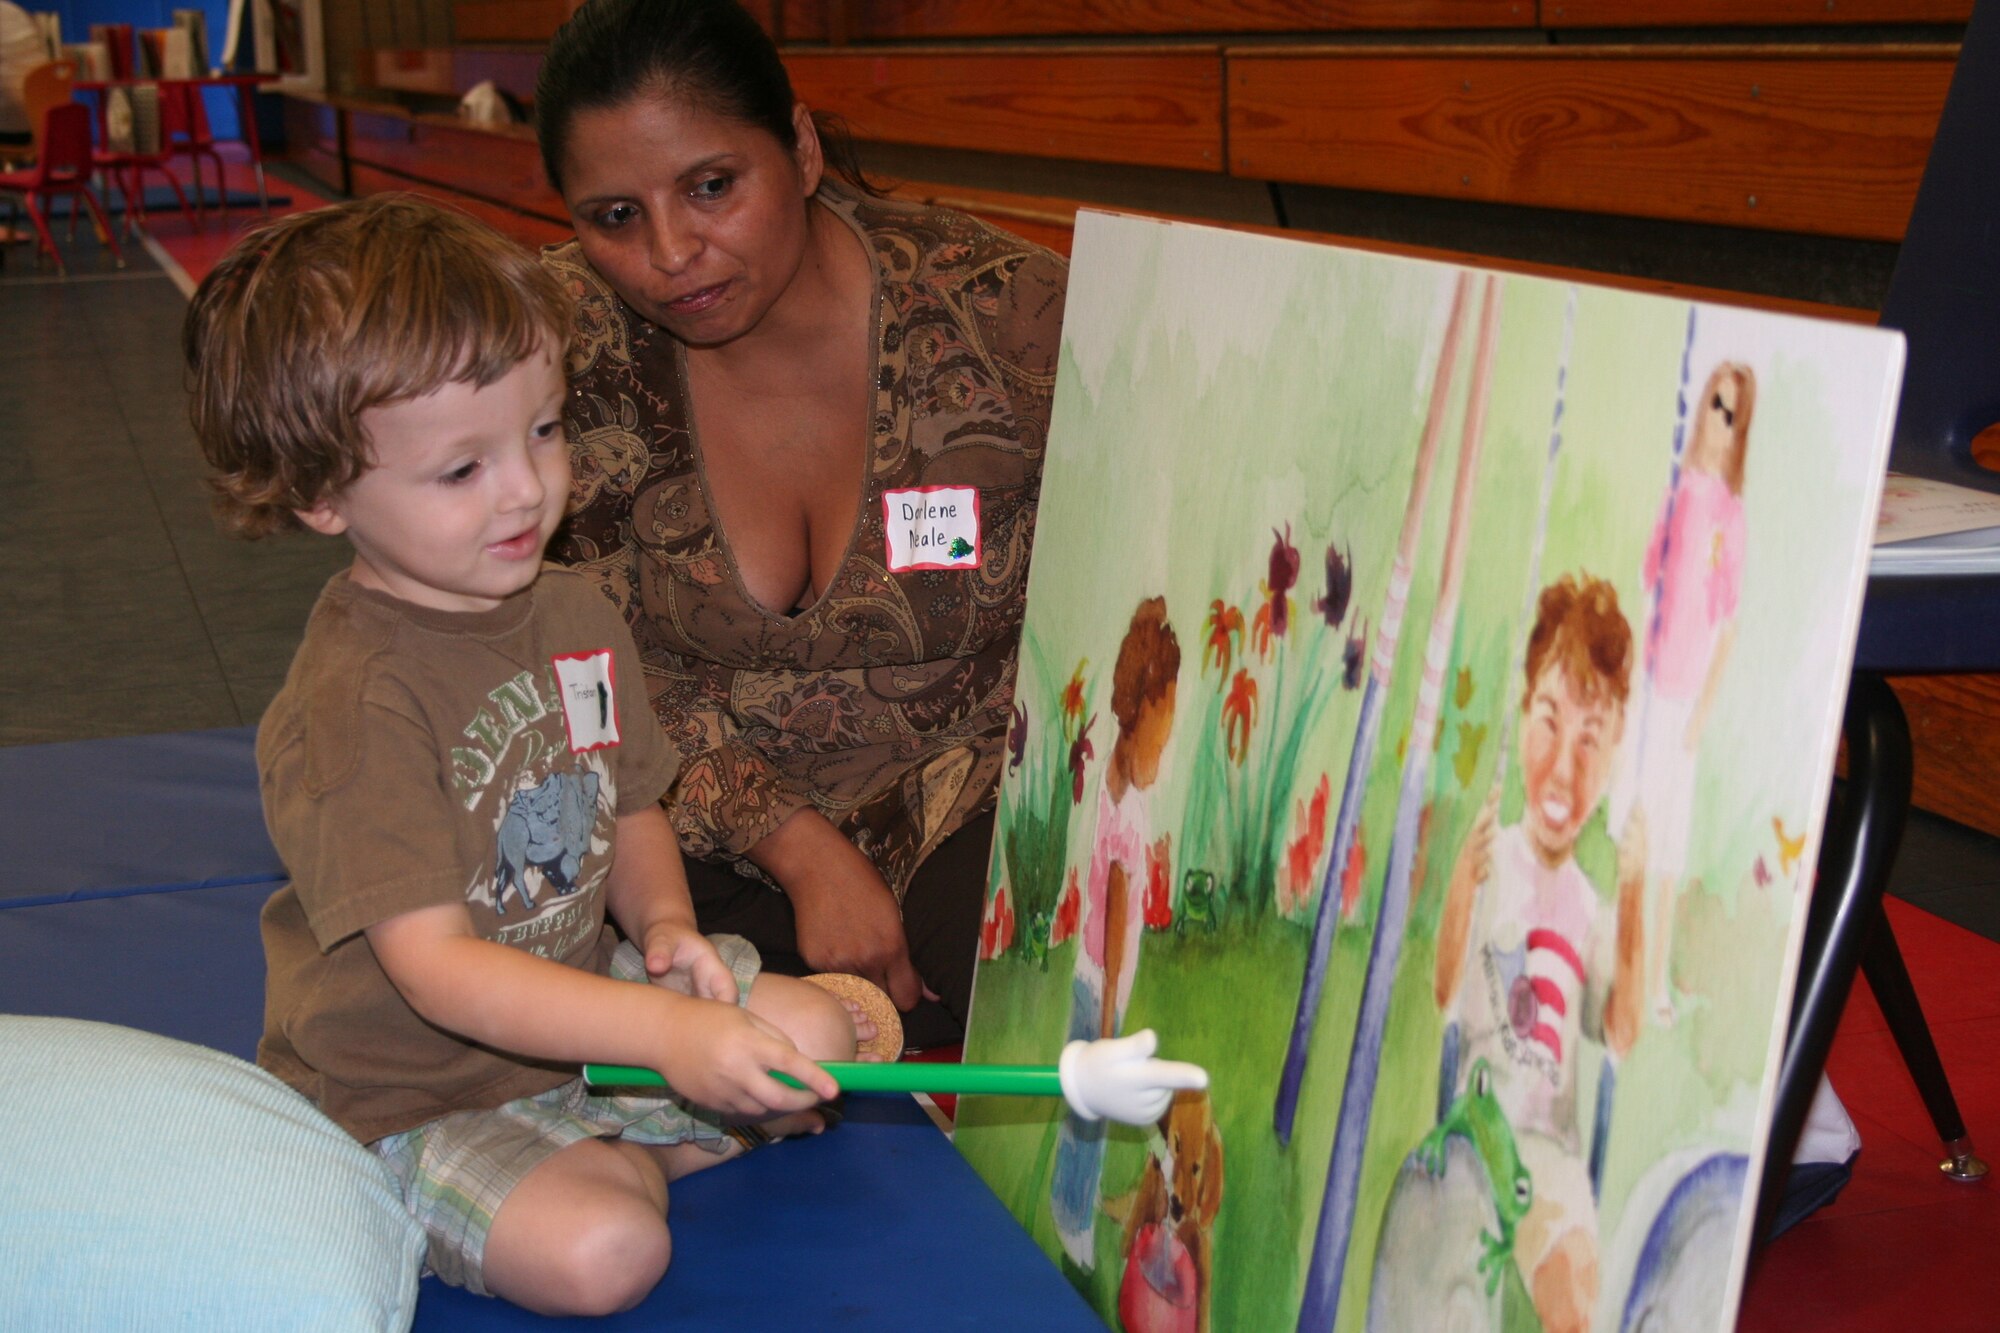 Tristan, 3, points to an enlarged picture during the Tell Me a Story kick off event, Sept. 22, 2007 at the Eglin Air Force Base Youth Center. The event focused on helping military children improve thier literary skills. (U.S. photo by Senior Airman Ali E. Flisek)